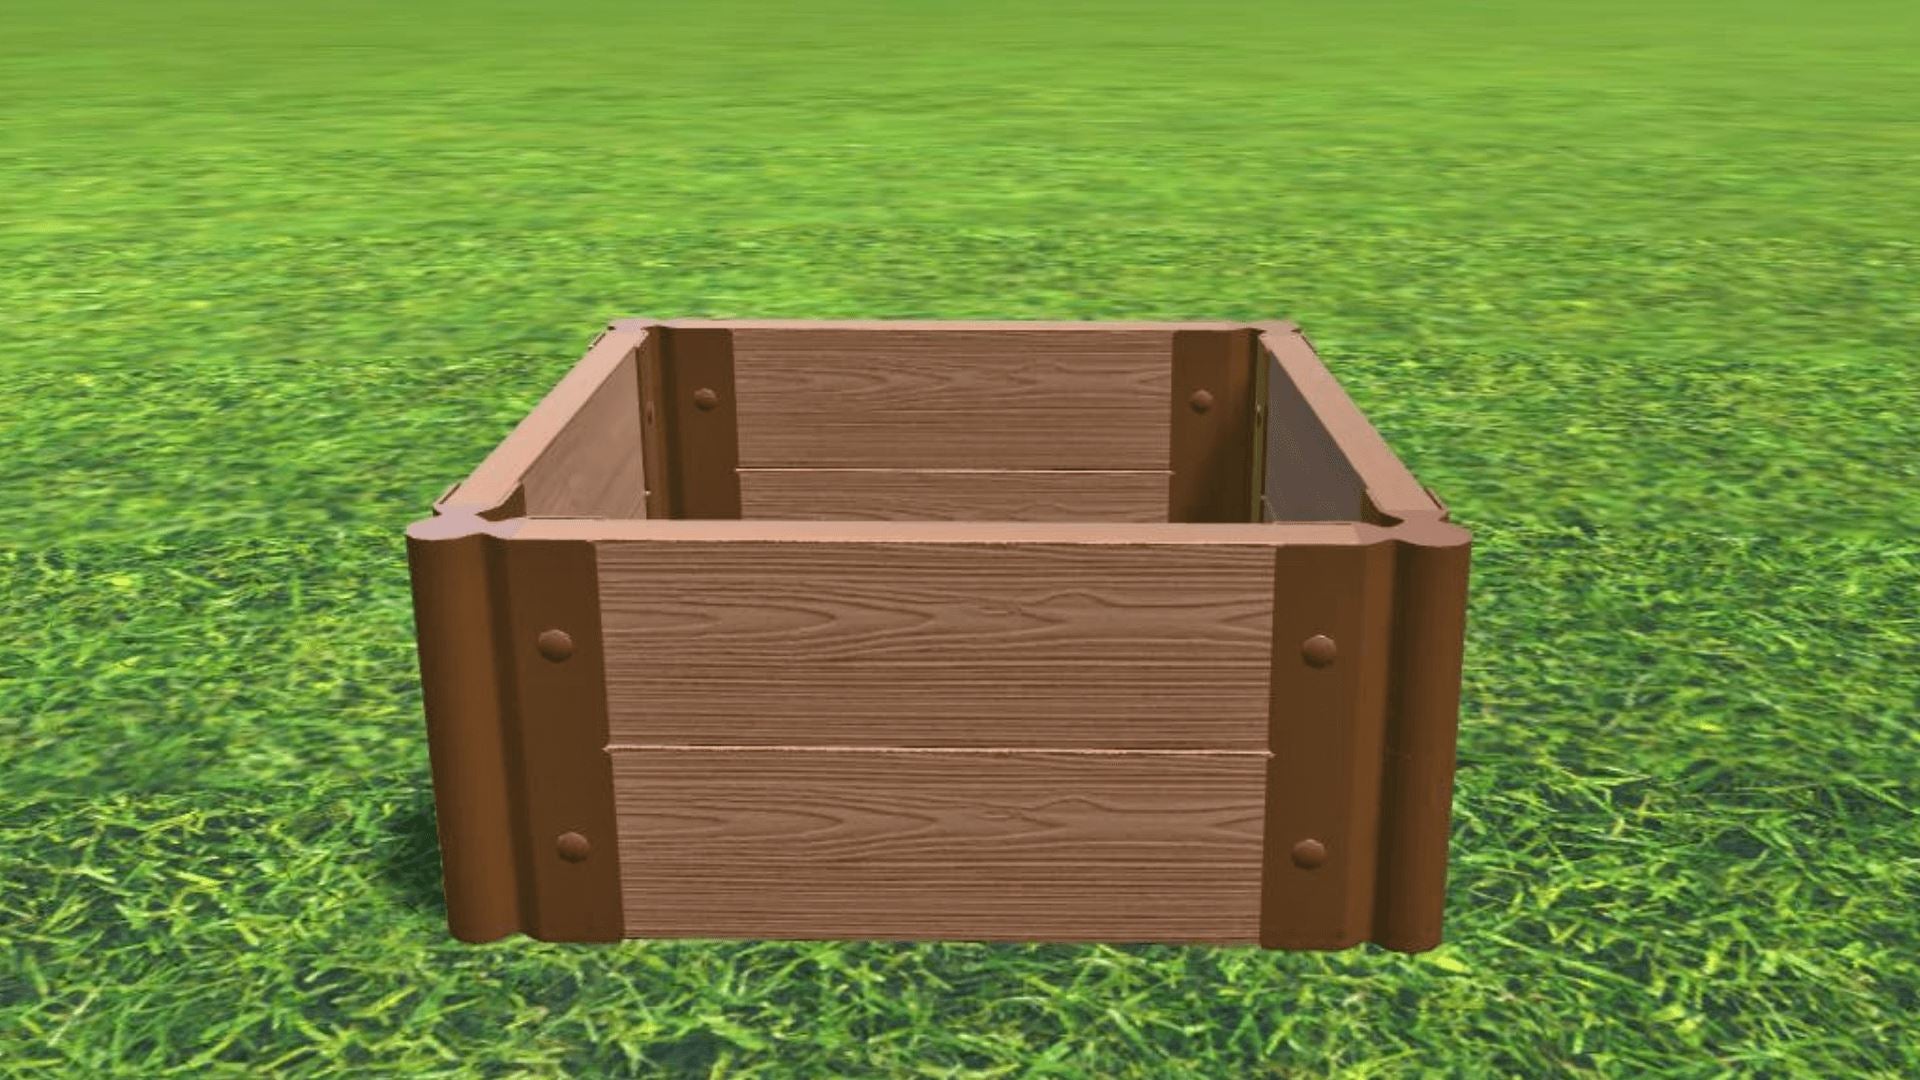 Tool-Free 2' x 2' Raised Garden Bed Raised Bed Planters Frame It All Classic Sienna 2" 2 = 11"